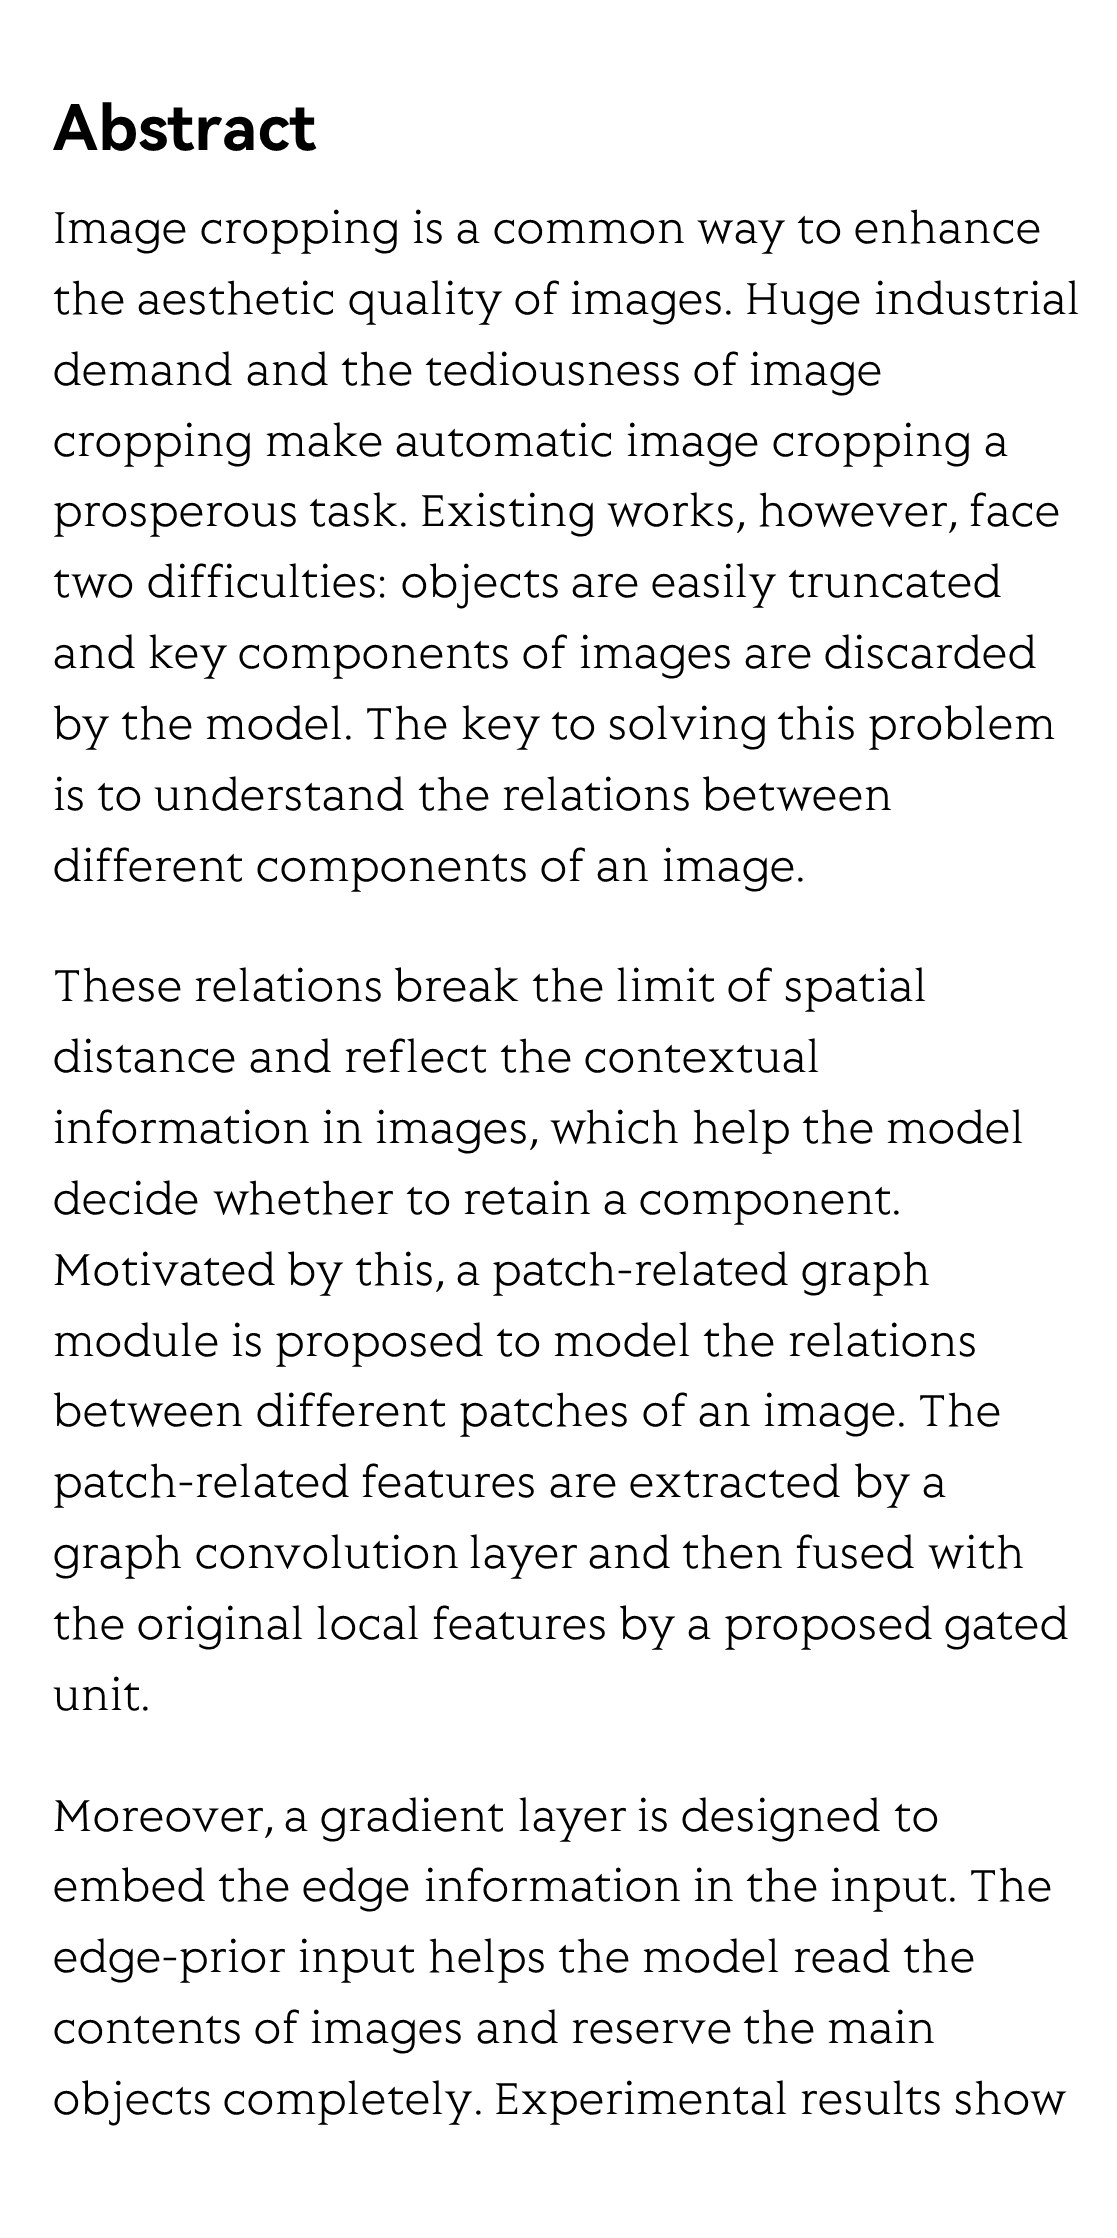 Image Cropping Assisted By Modeling Inter-Patch Relations_2